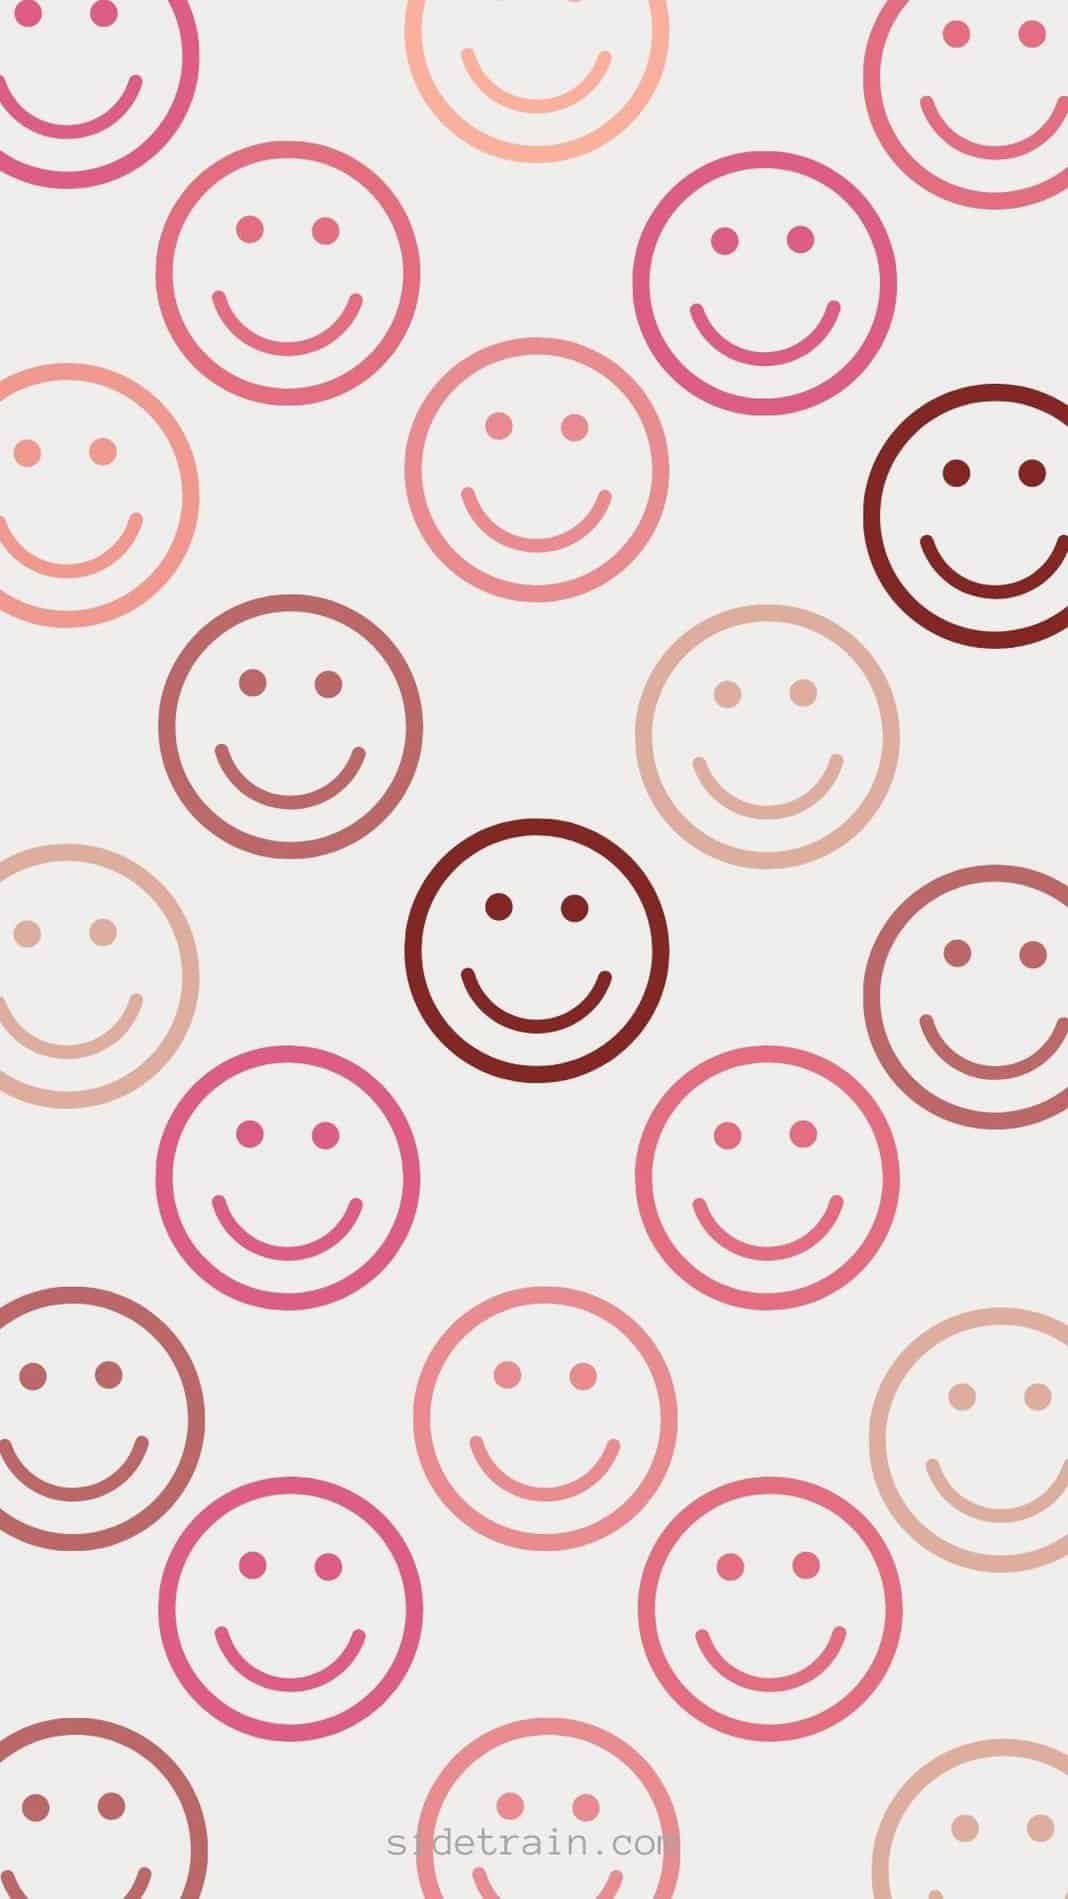 Smile Face iPhone Wallpaper 